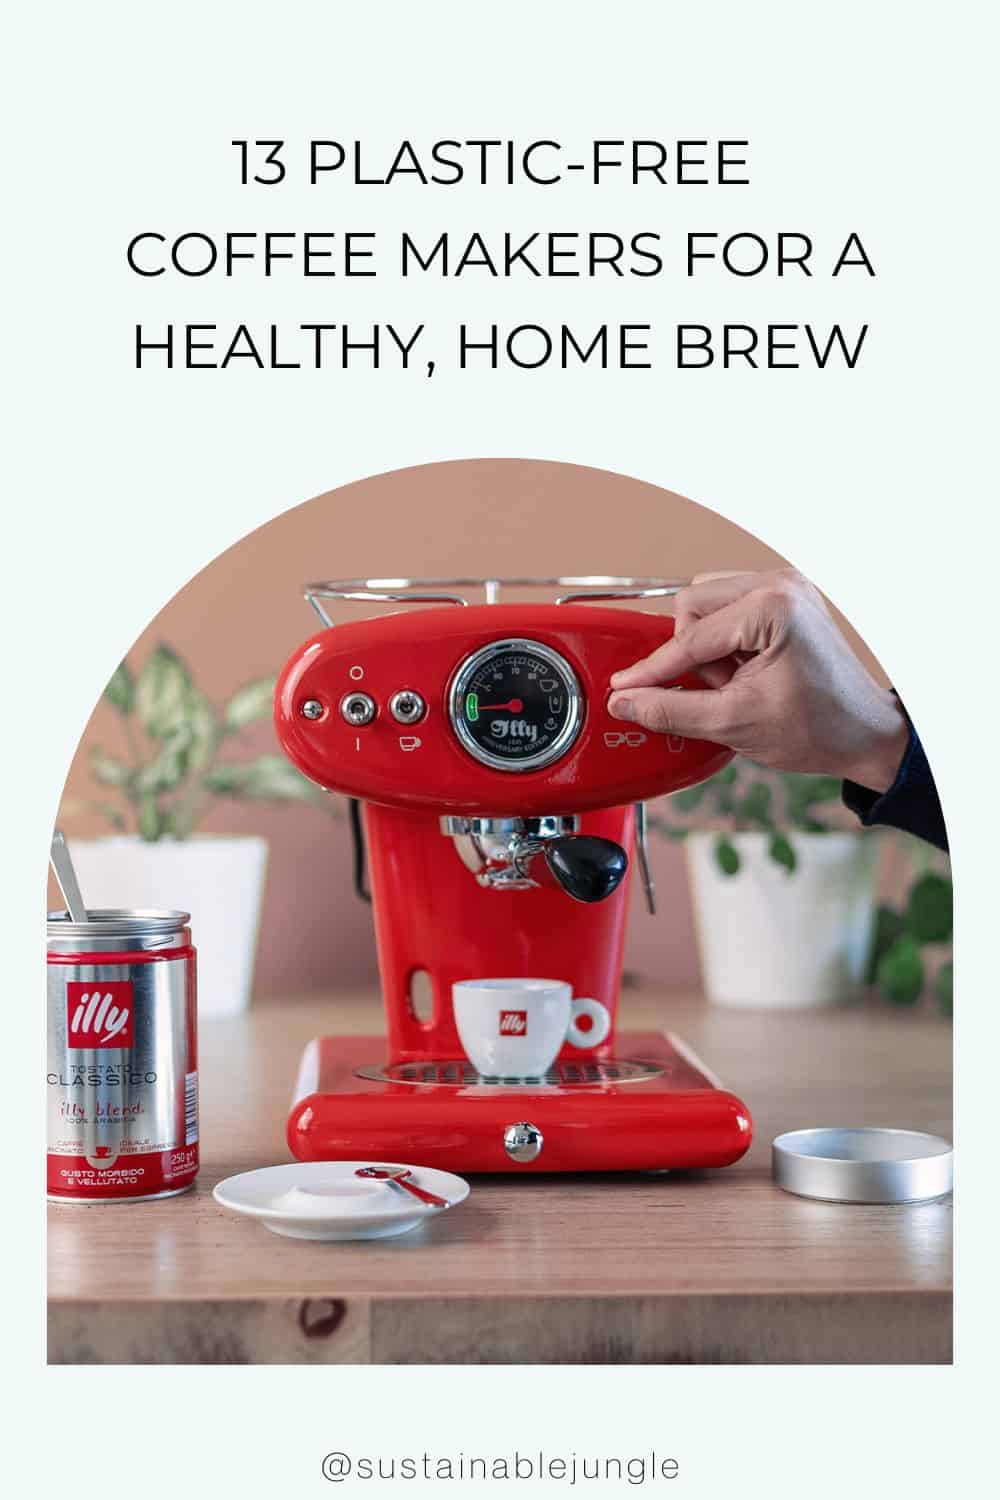 13 Plastic-Free Coffee Makers For A Healthy, Home Brew Image by illy #plasticfreecoffeemaker #nontoxiccoffeemakers #noplasticcoffeemakers #bestplasticfreecoffeemakers #plasticfreedripcoffeemakers #sustainablejungle